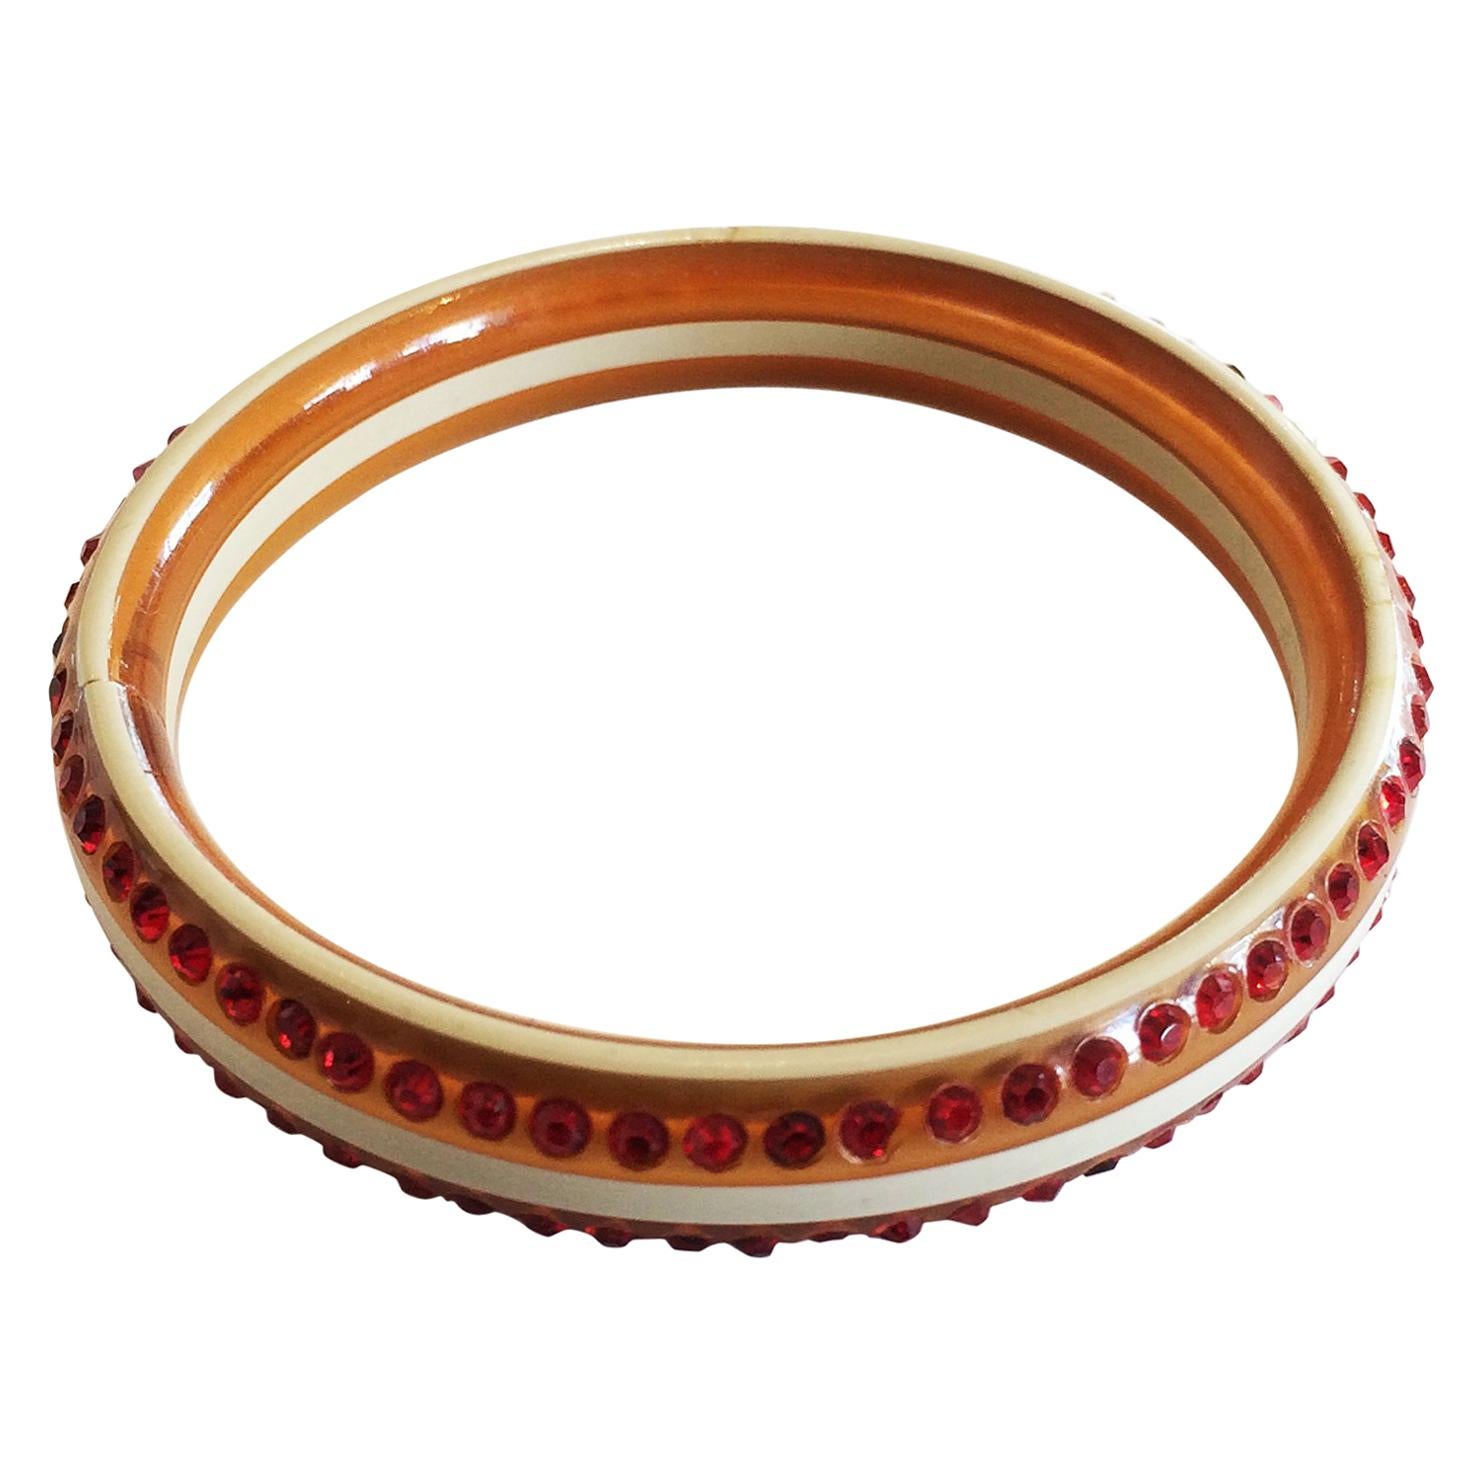 Art Deco red and cream celluloid bangle bracelet with rhinestones